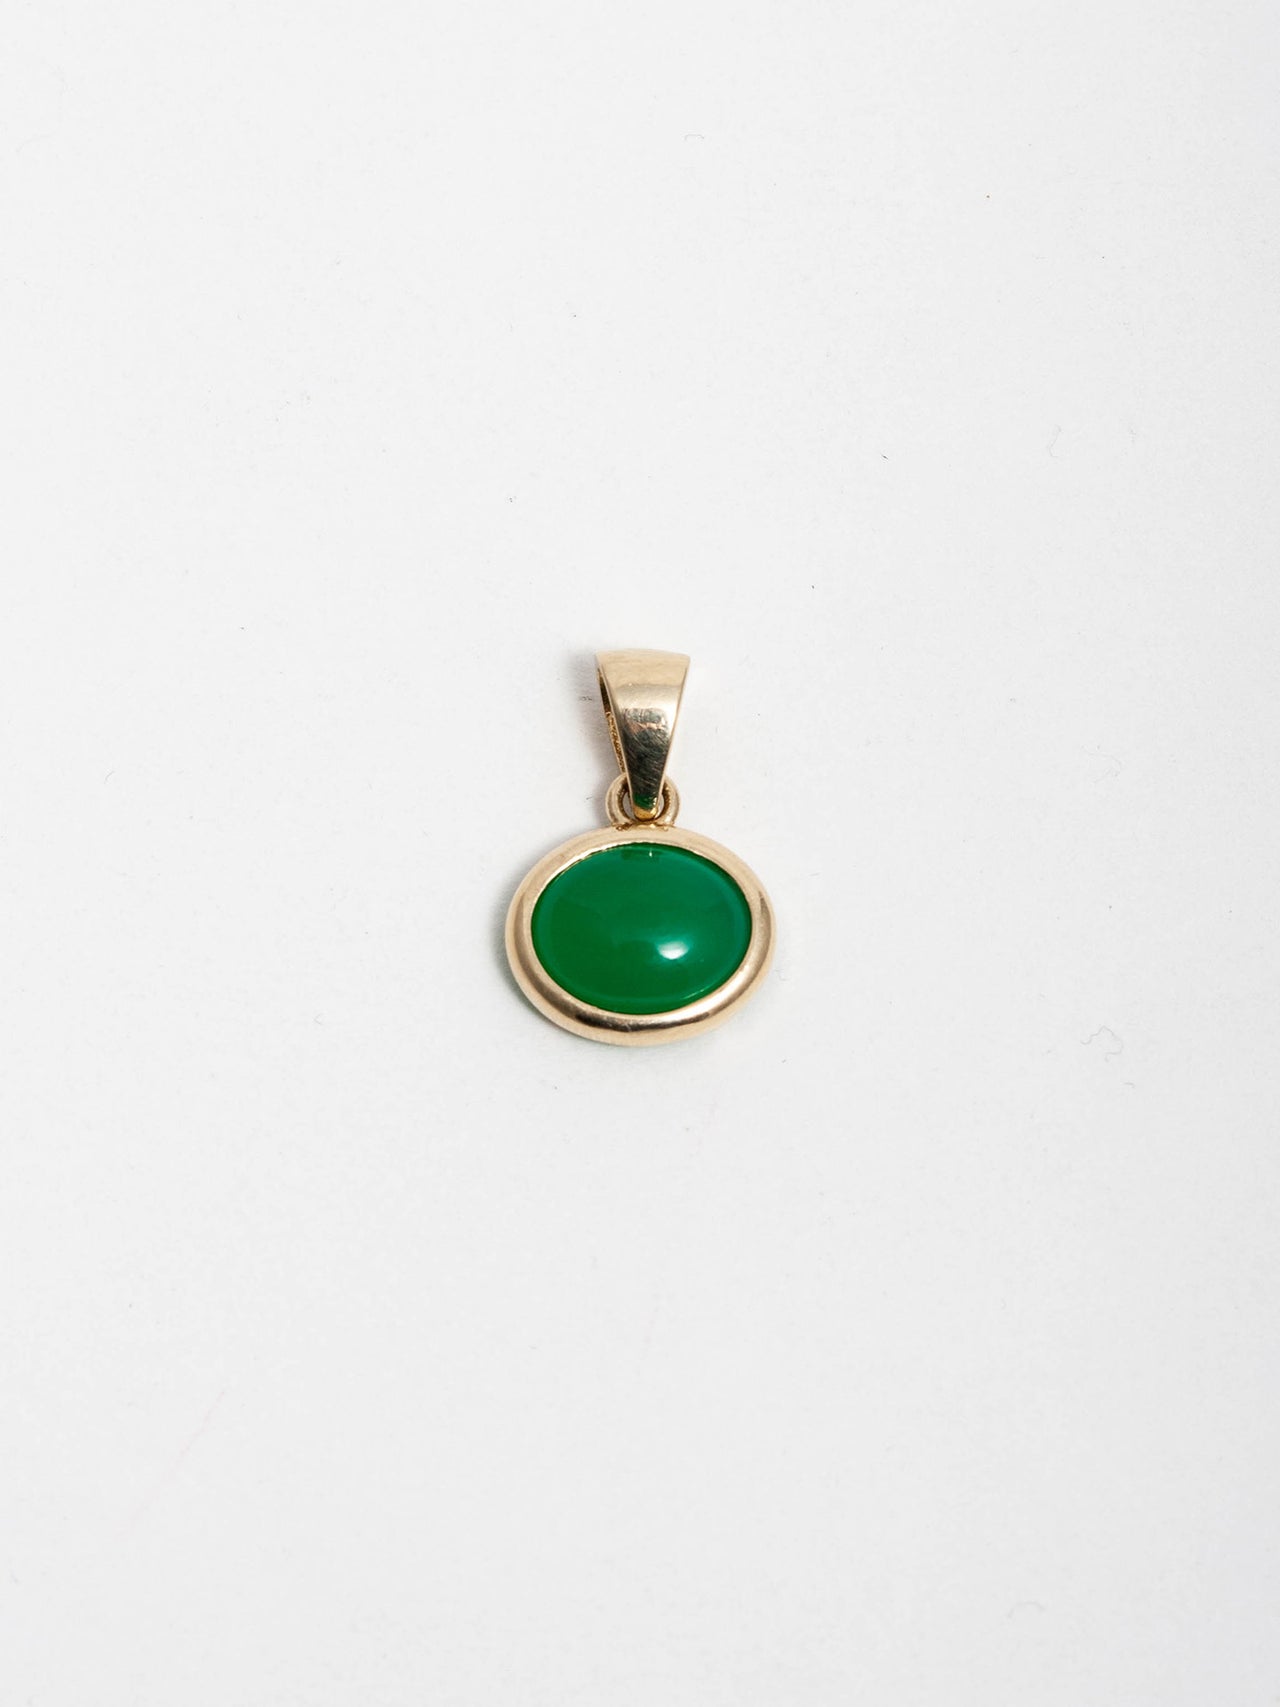 14kt Yellow Gold Edan Amulet Pendant pictured on light grey background. 